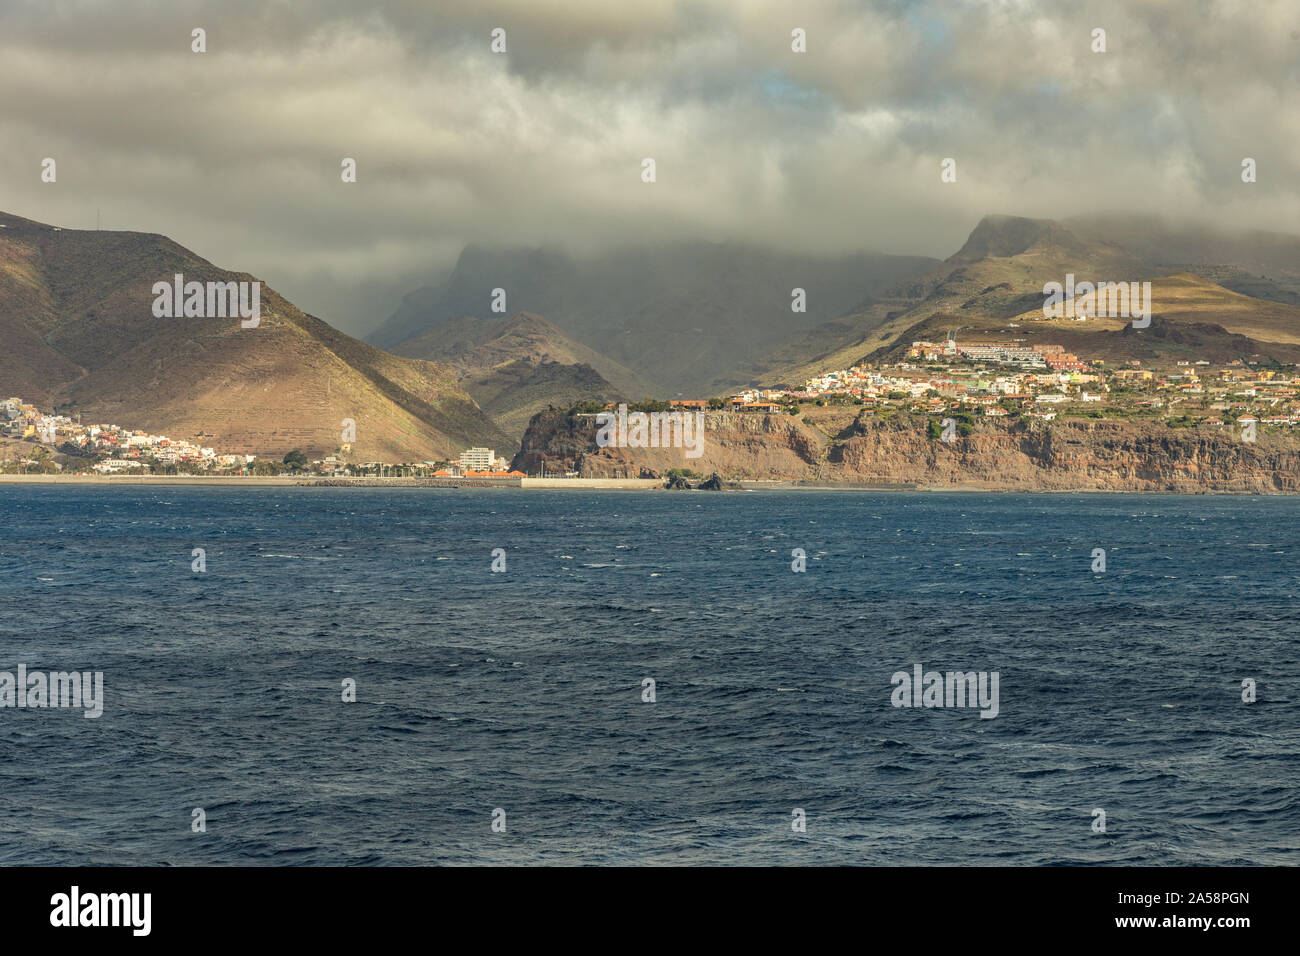 Port and town San Sebastian - capital of La Gomera Island. View from the ferry cruising between the islands of Tenerife and La Gomera. Canary Islands, Stock Photo